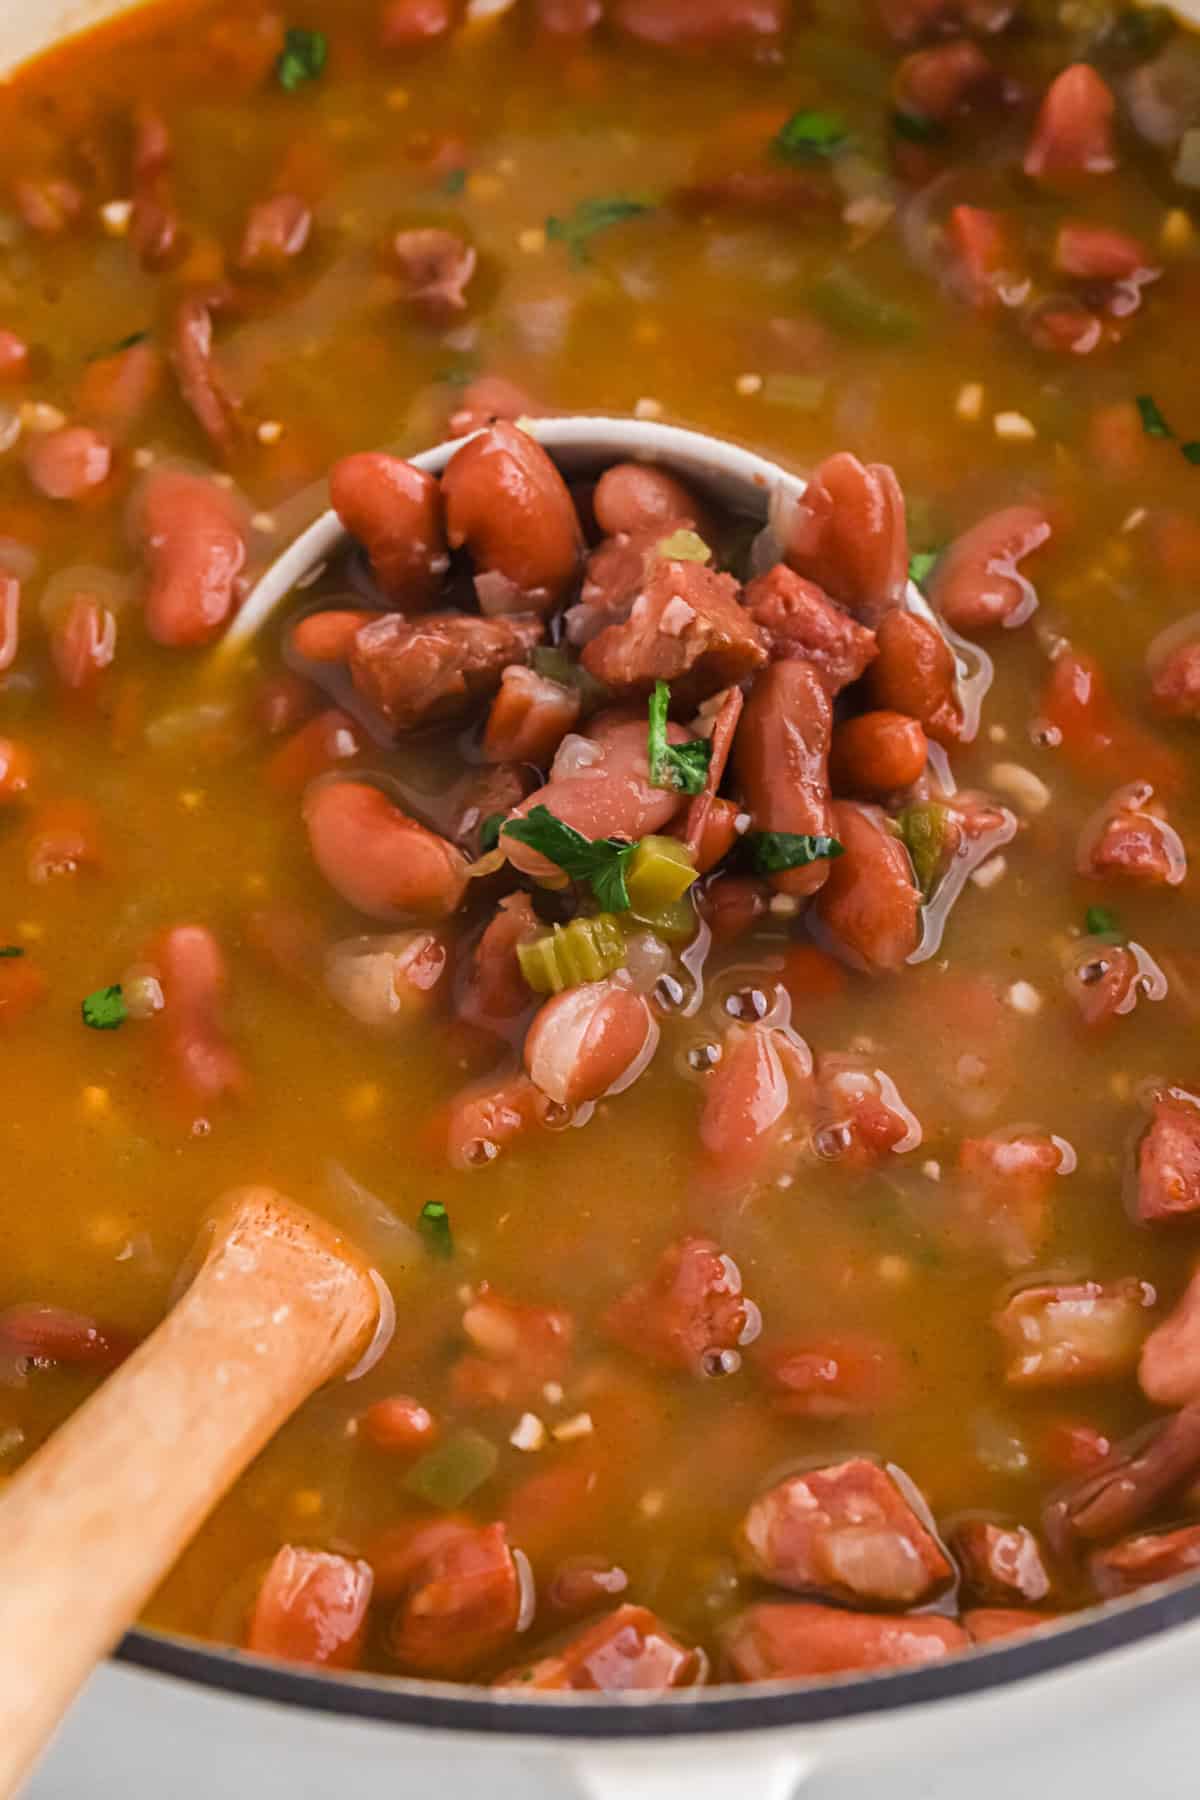 A ladle of red beans ready to enjoy